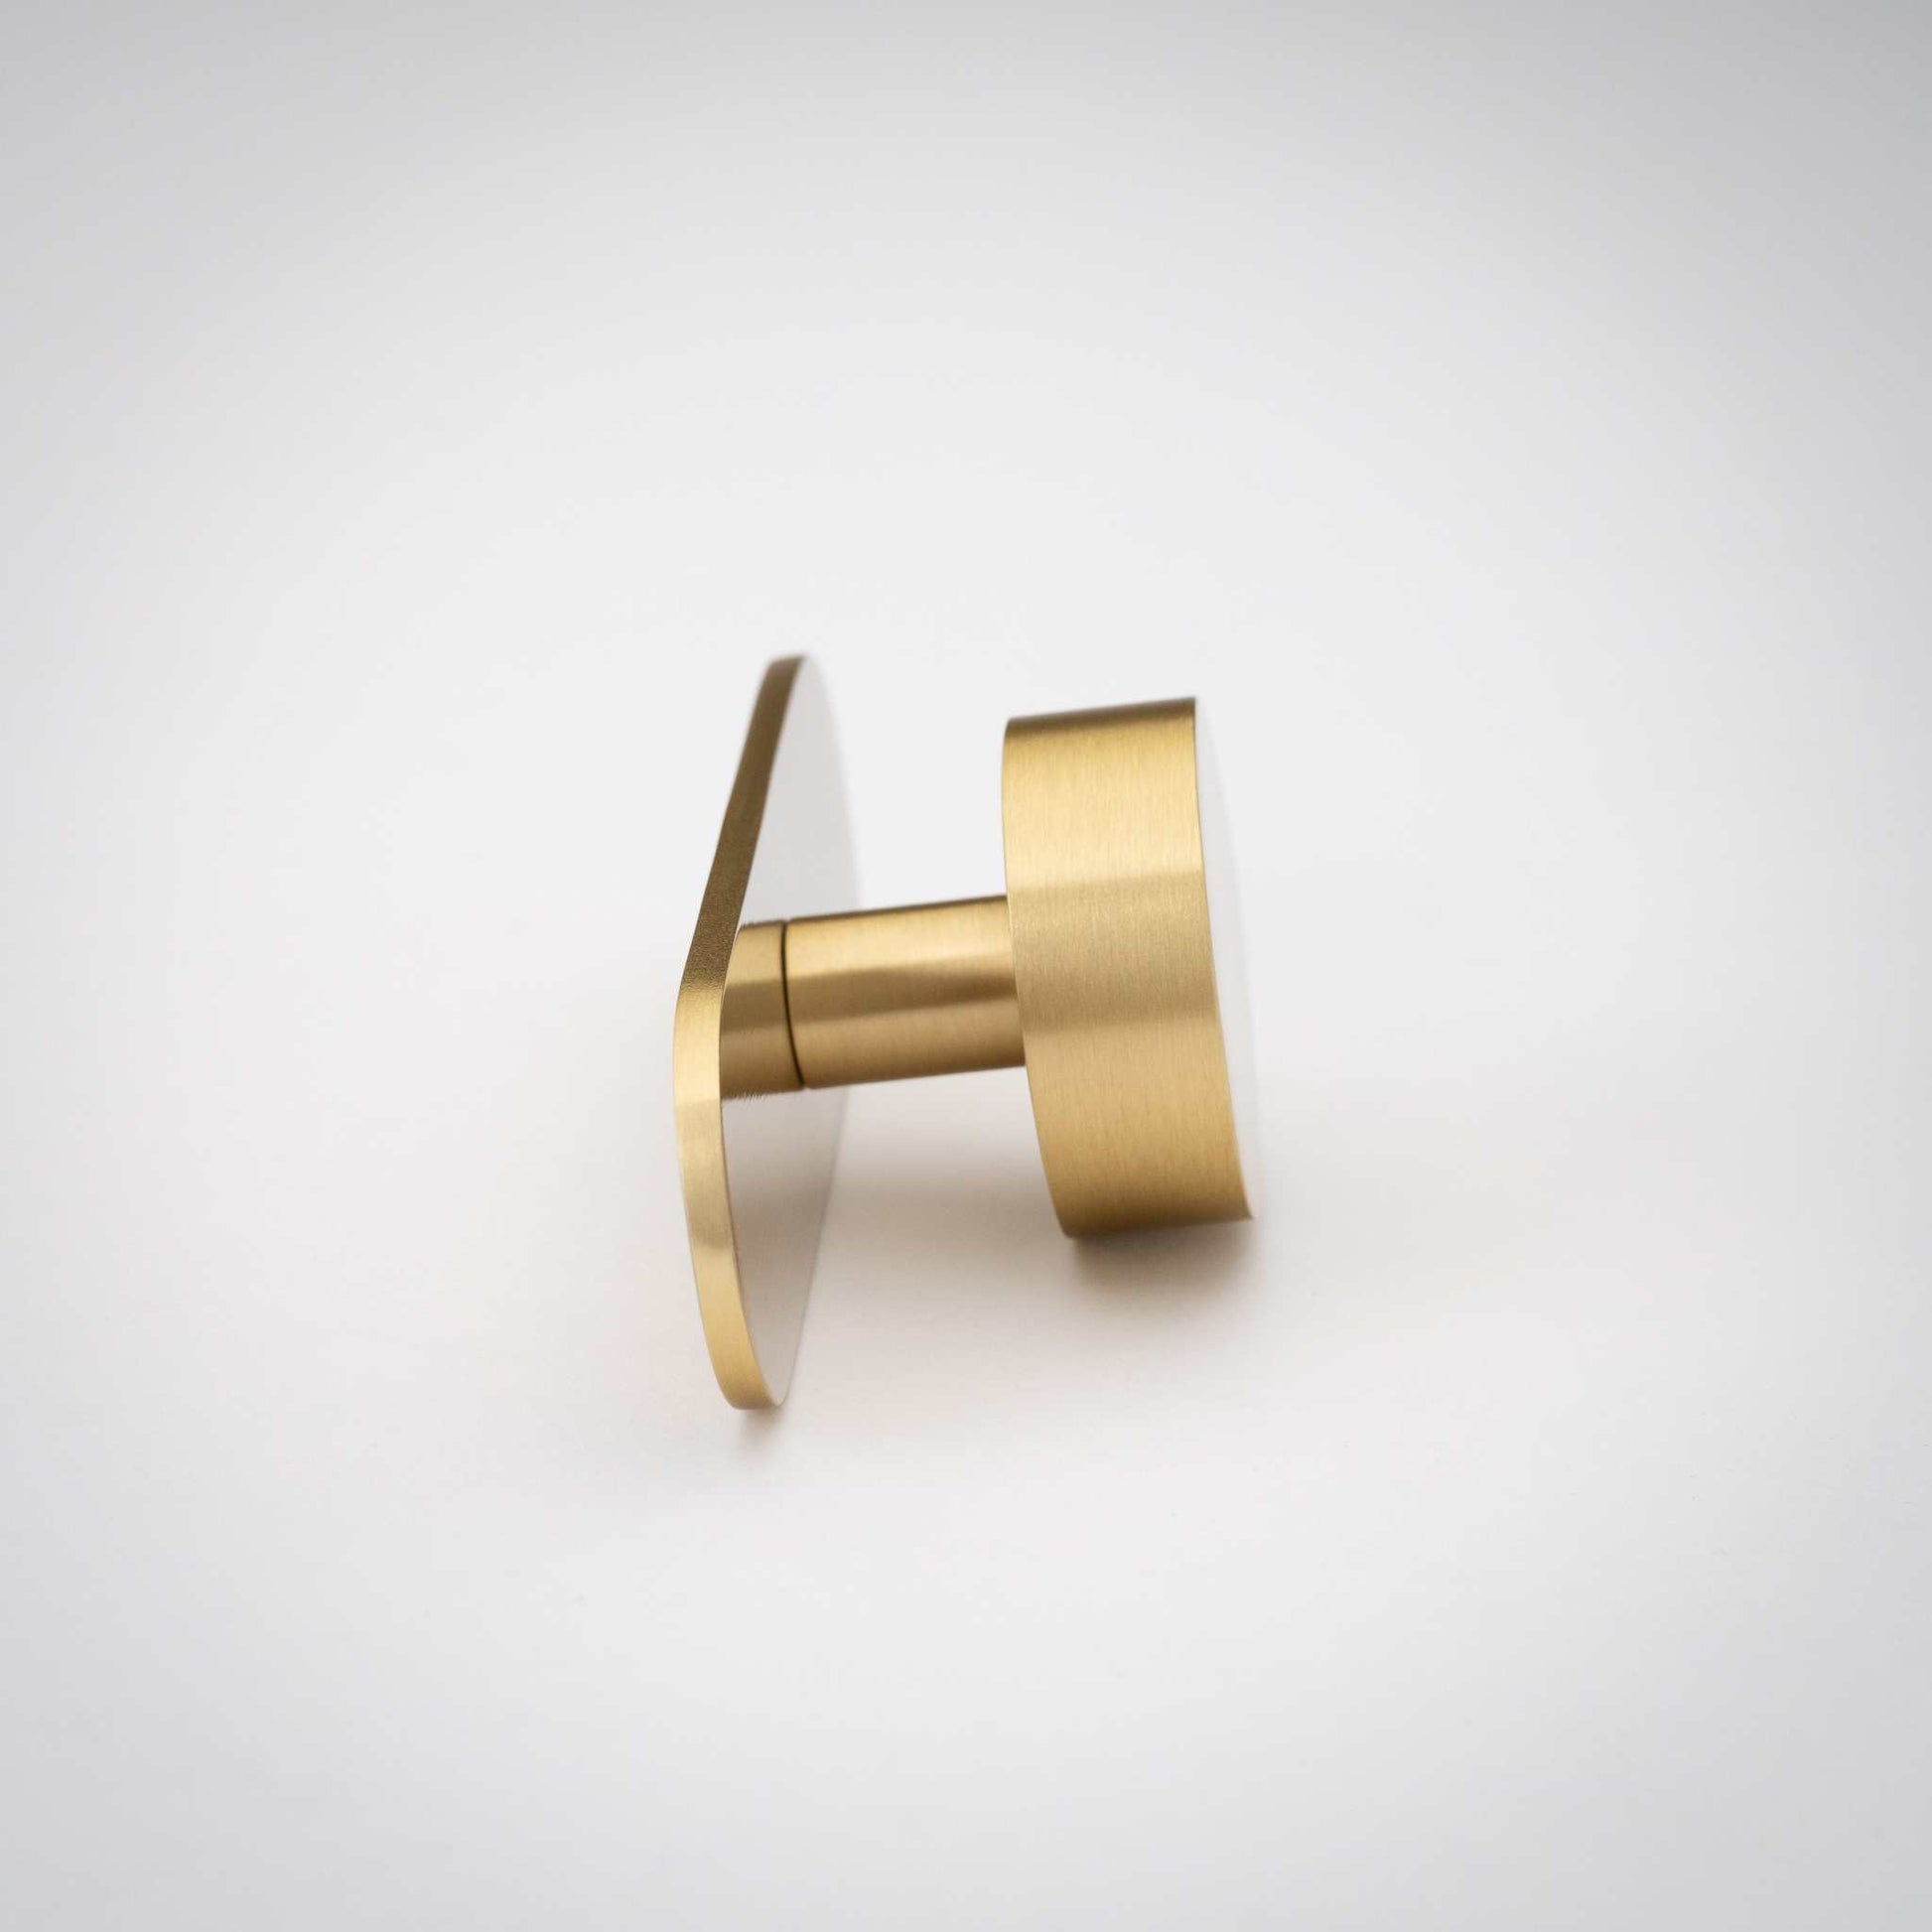 Orbital Knob, Solid Brass Knobs


Our Orbital Knob adds a touch of simplicity to any contemporary design project. The solid brass construction has an incredible weight in the hand, ensuring it wilknobOrbital Knob, Solid Brass Knobs